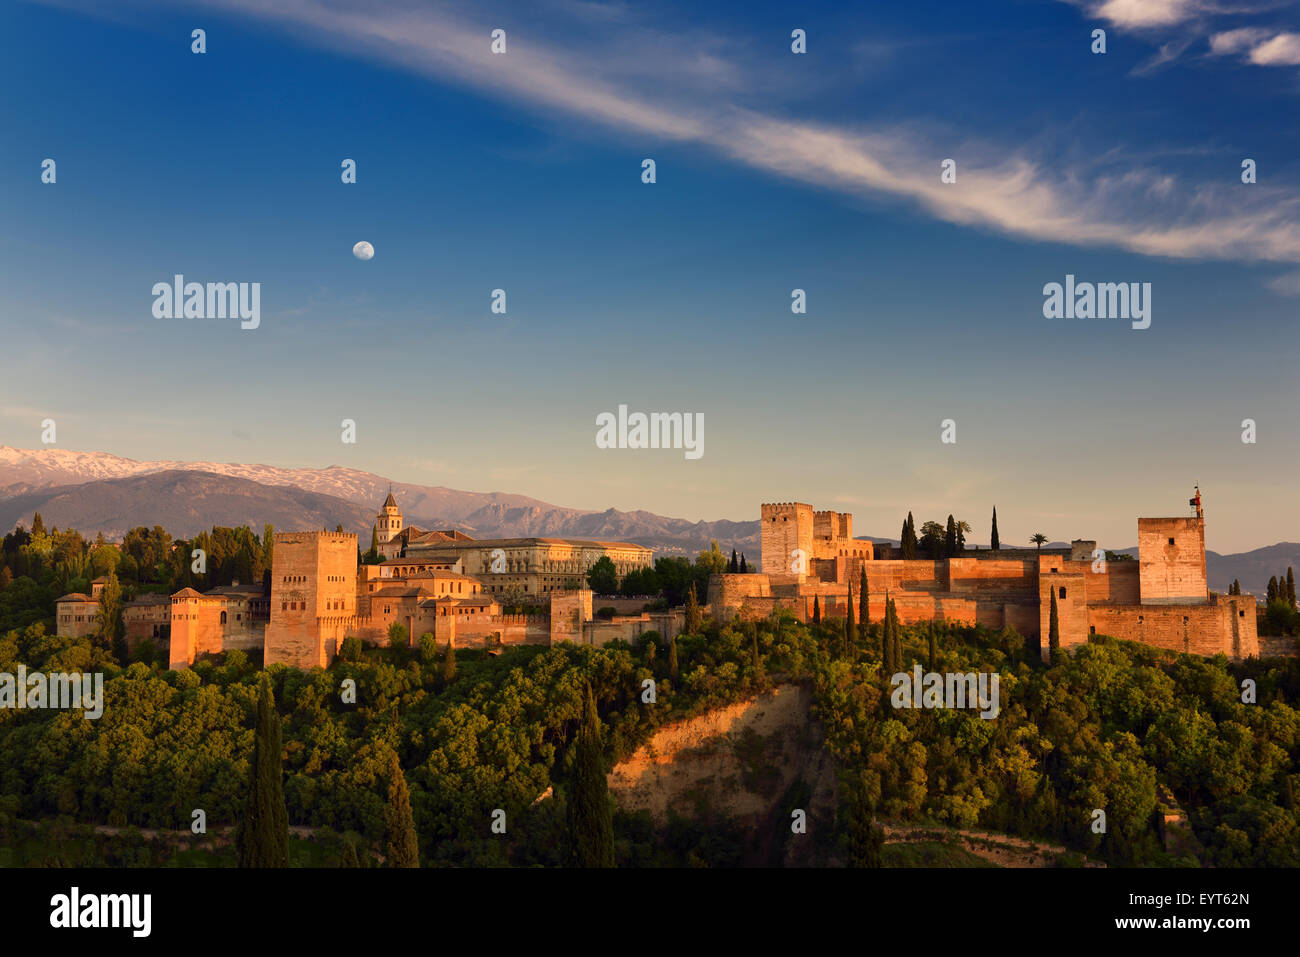 Moon and golden sunset on hilltop Alhambra Palace fortress complex Granada Spain with snow capped Sierra Nevada mountains Stock Photo